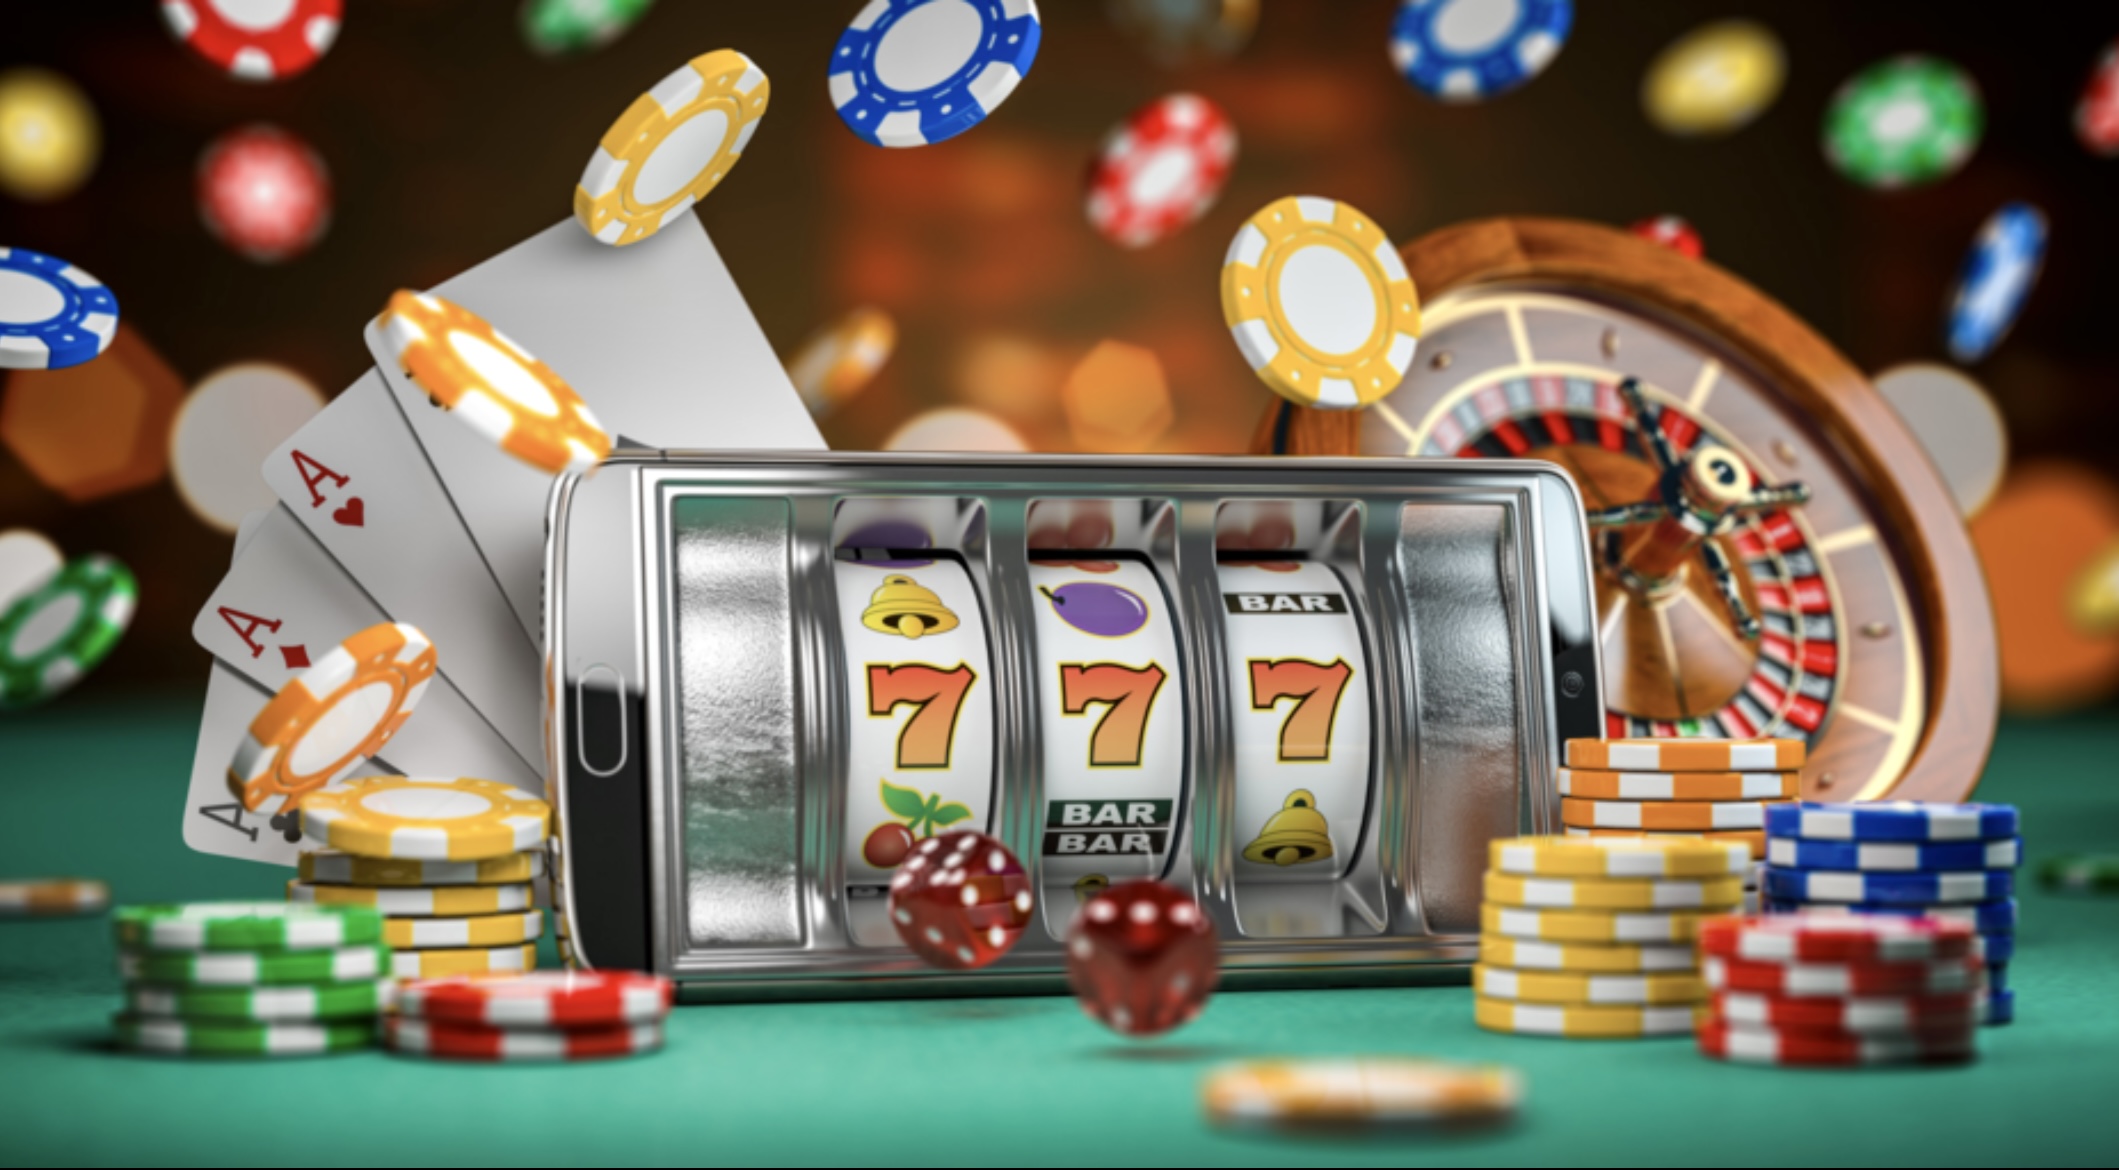 Real Online Casino in Canada: All You Need to Know